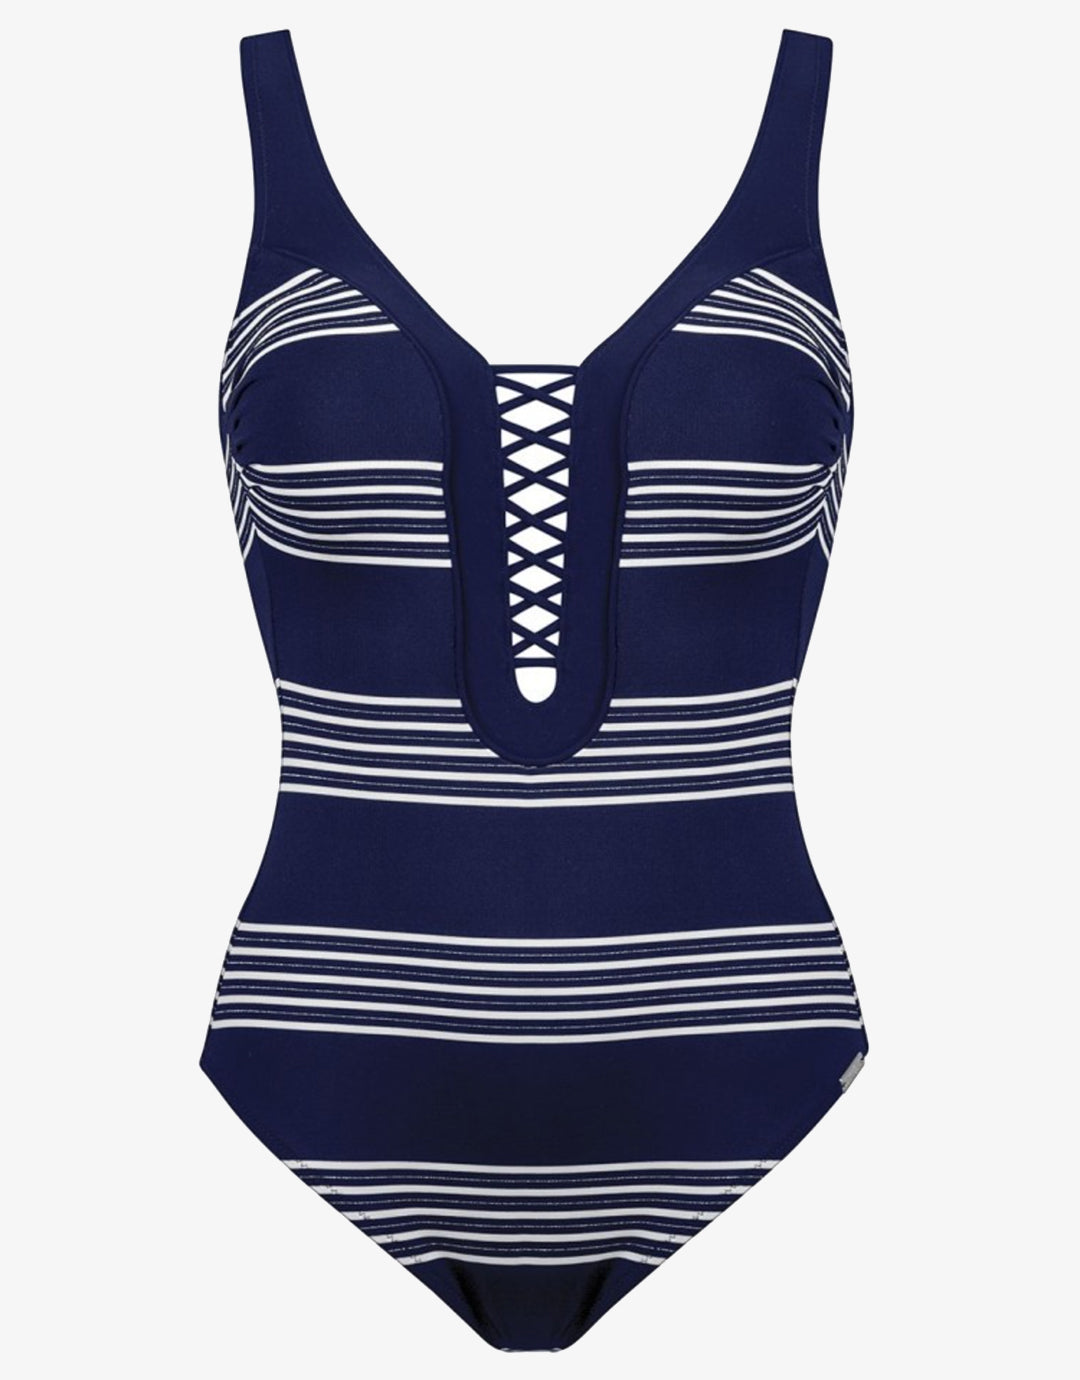 Pace Plunge Swimsuit - Navy White - Simply Beach UK